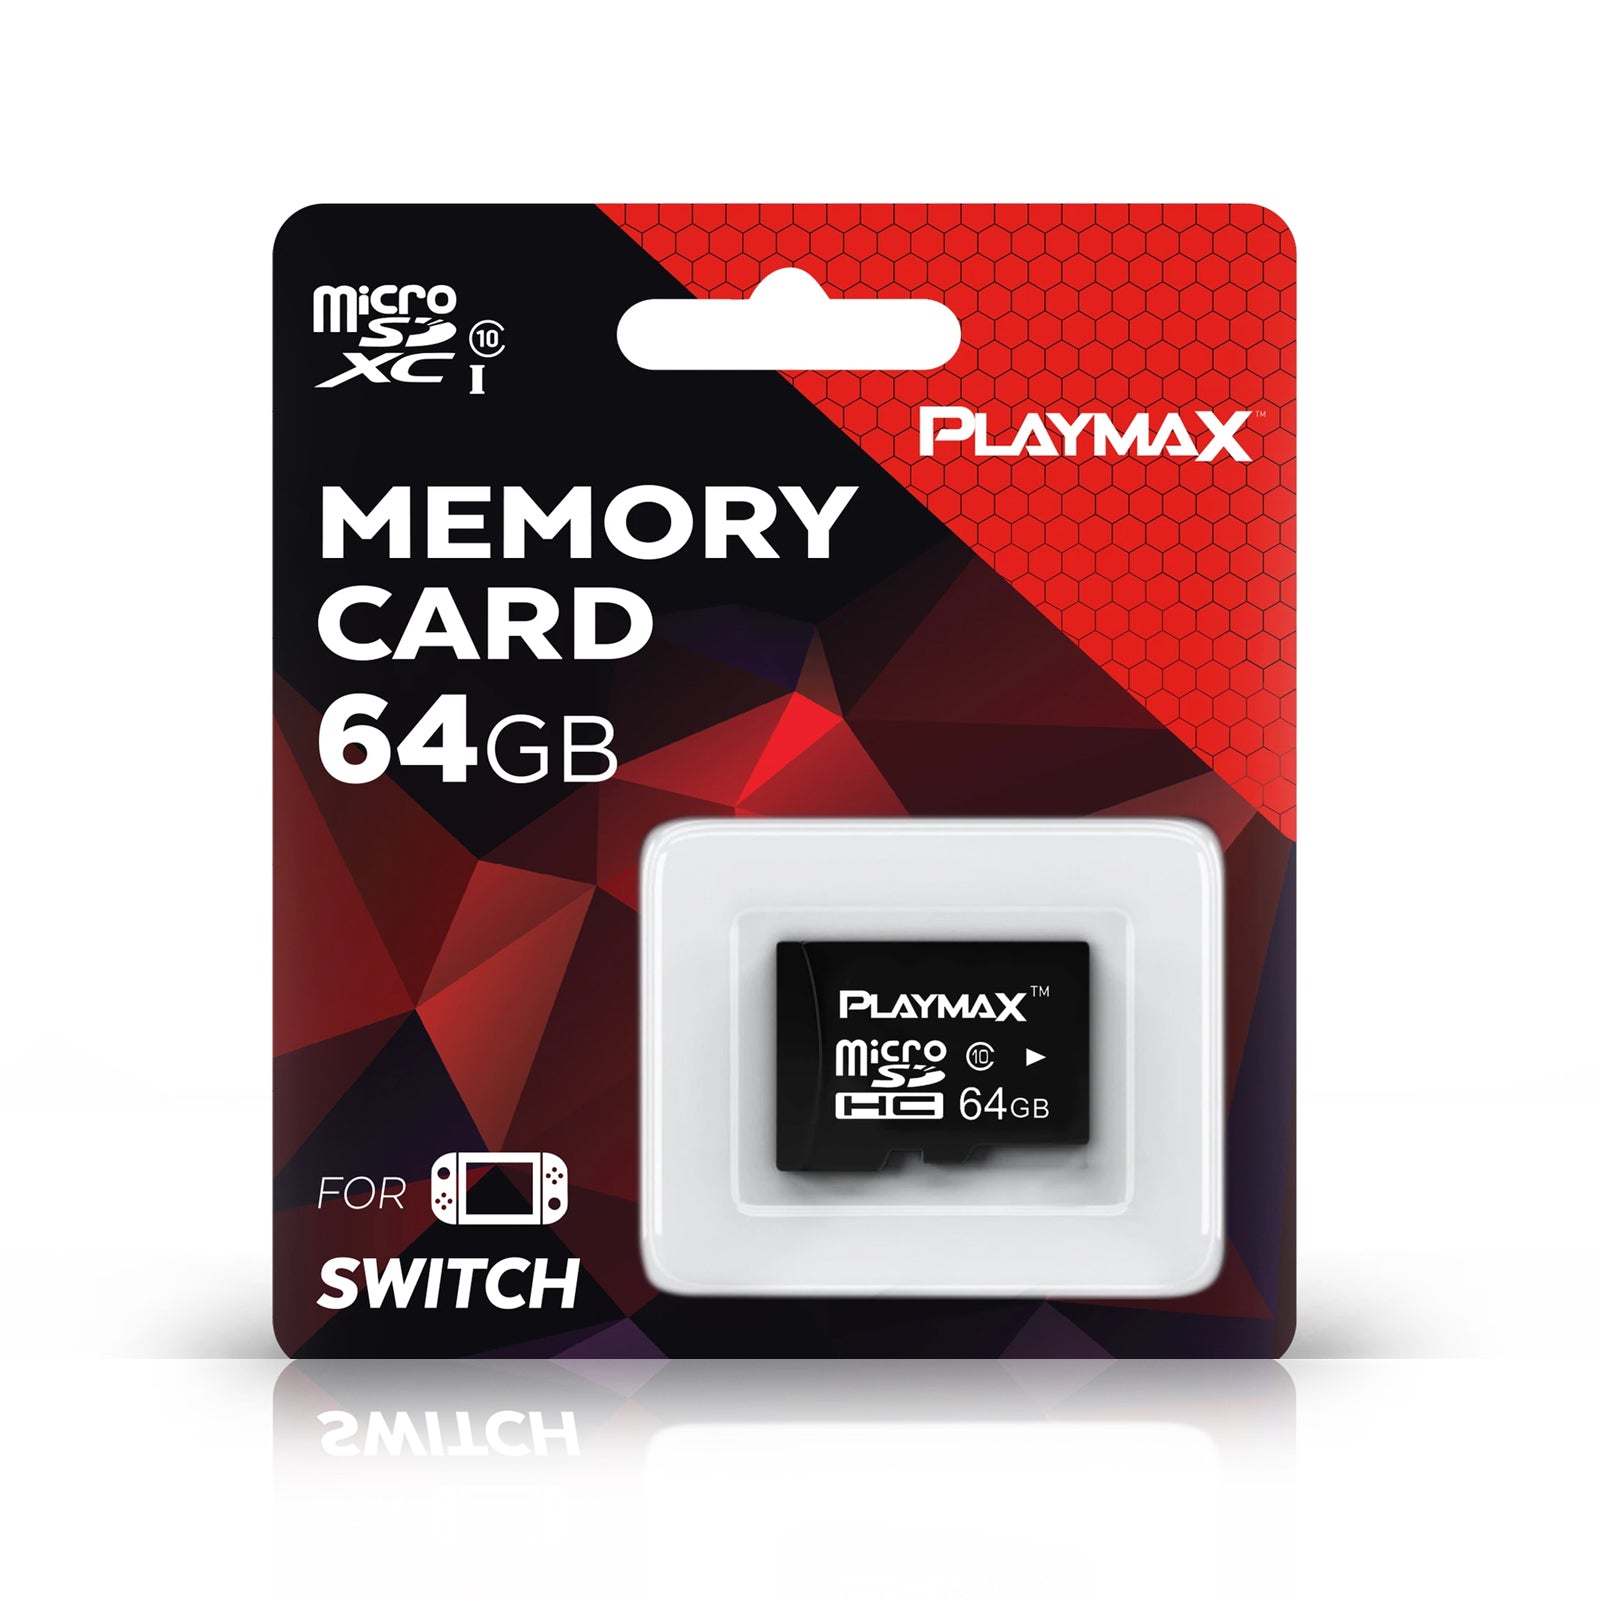 PLAYMAX MEMORY CARD 64GB FOR SWITCH